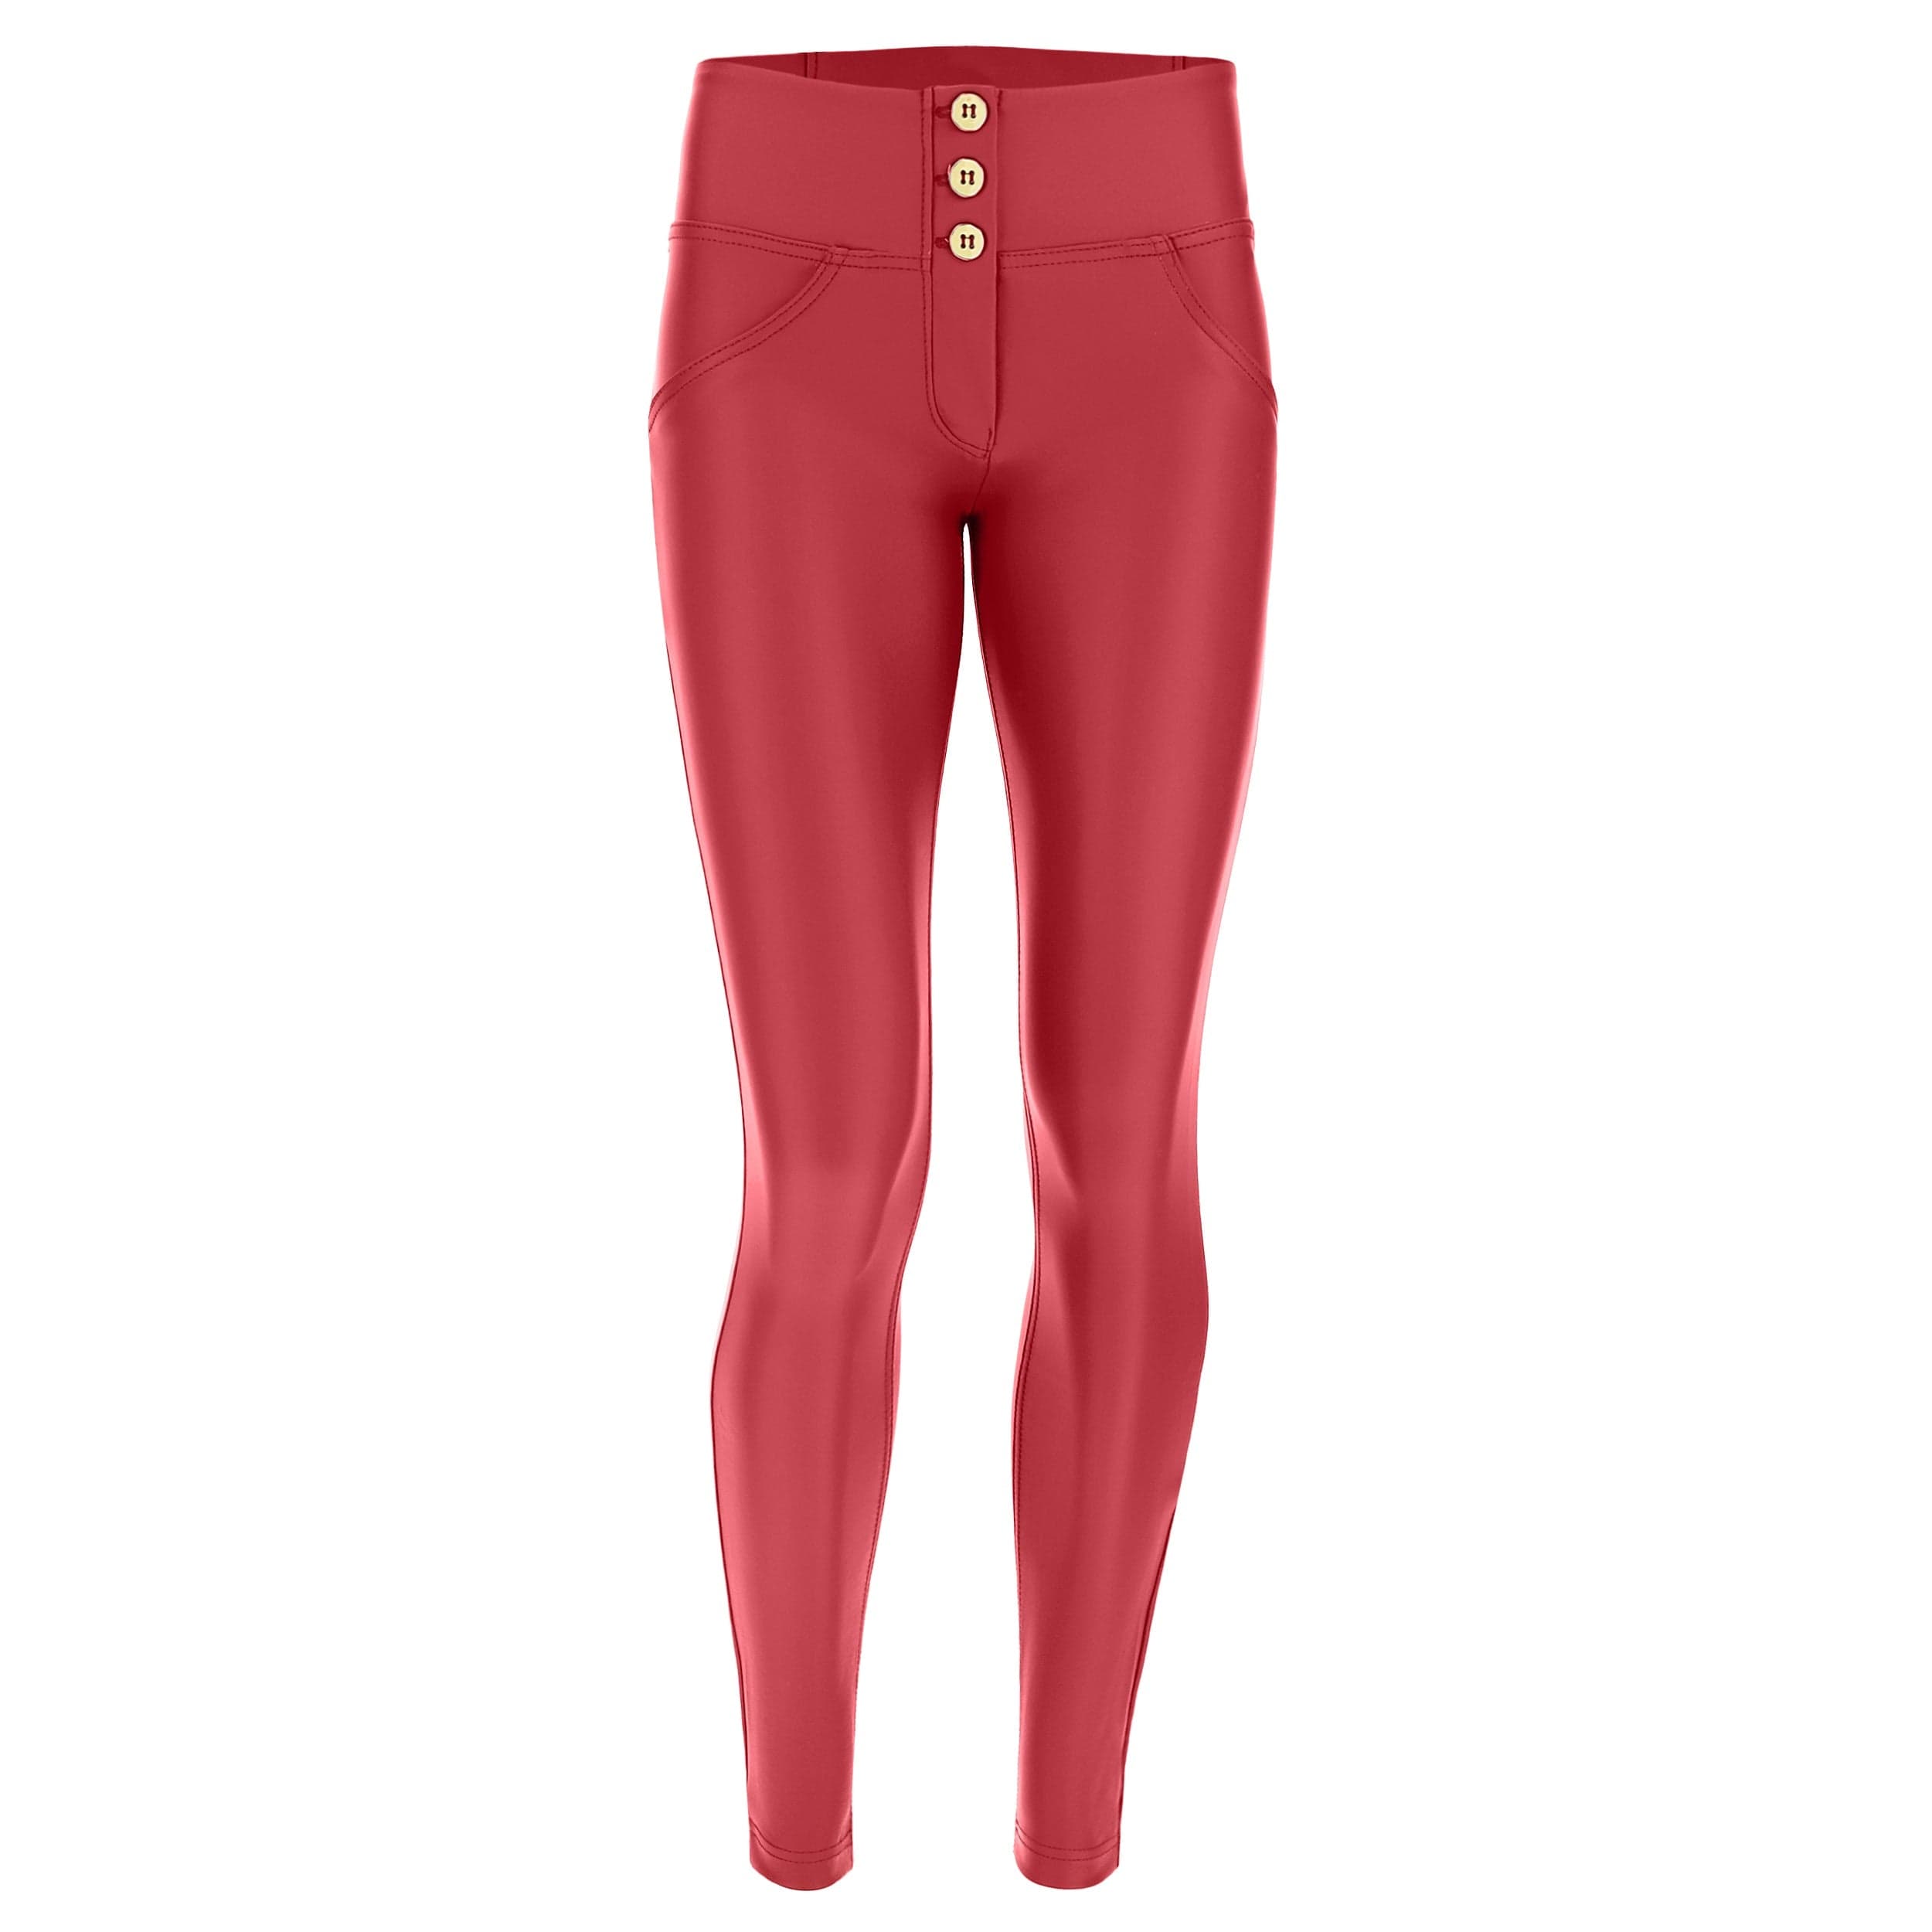 WR.UP® 3 Button Faux Leather - Mid Rise - Full Length - Deep Red 2